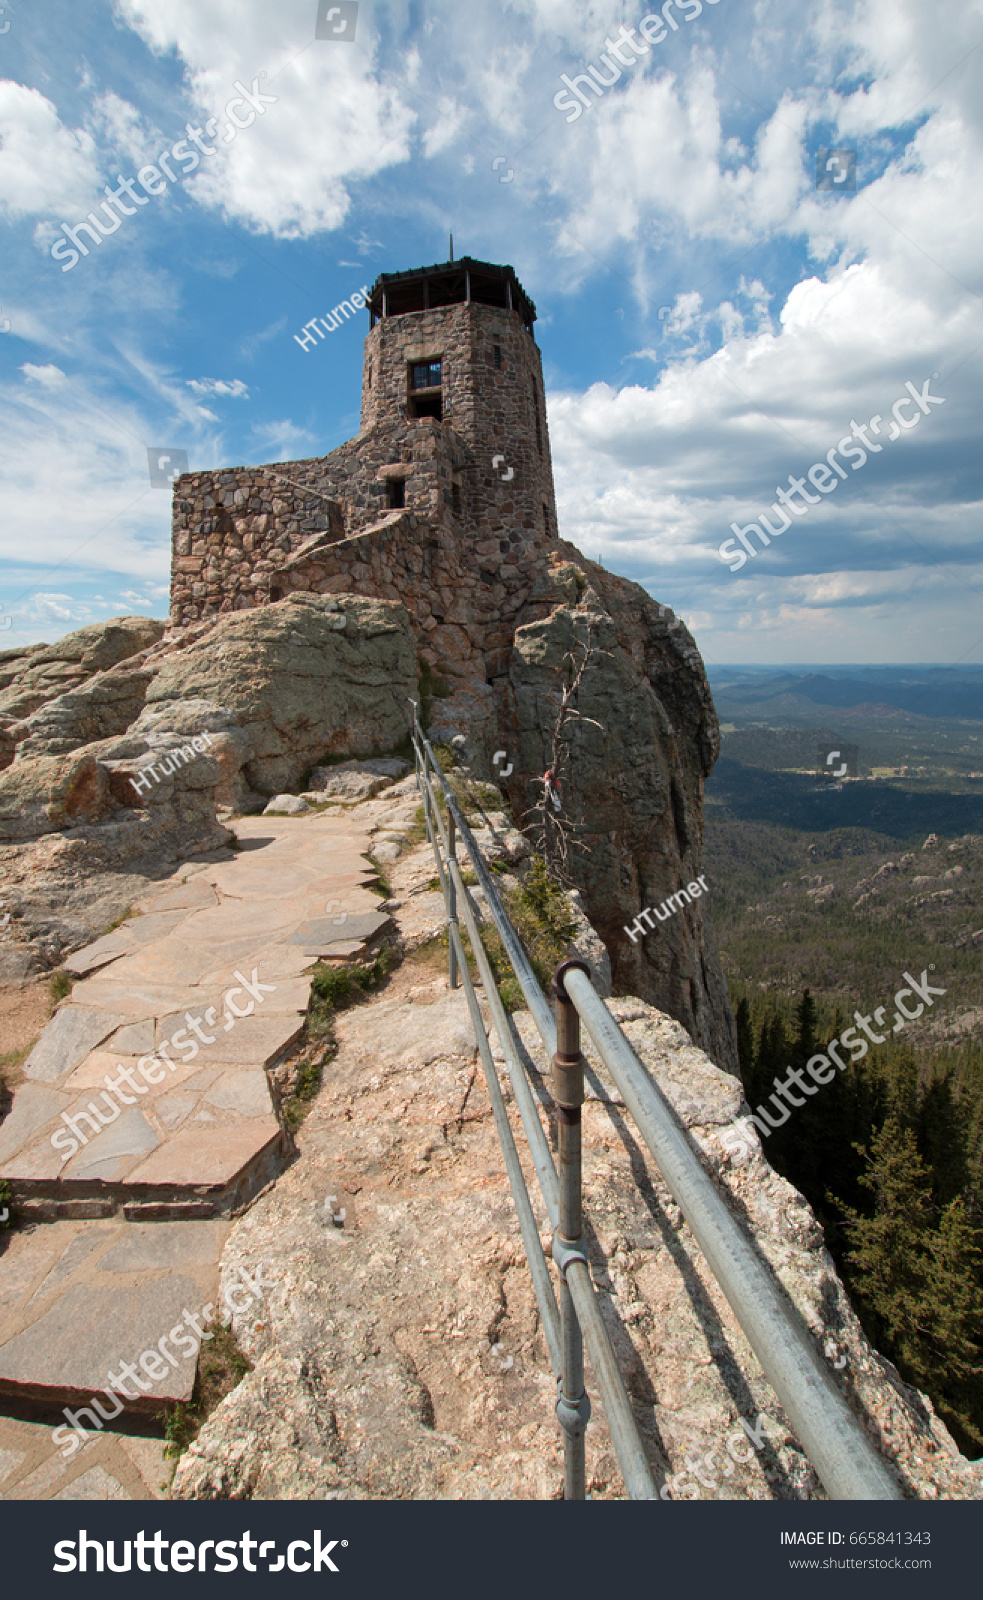 Harney Peak Fire Lookout Tower in Custer State Park in the Black Hills of South Dakota USA #665841343